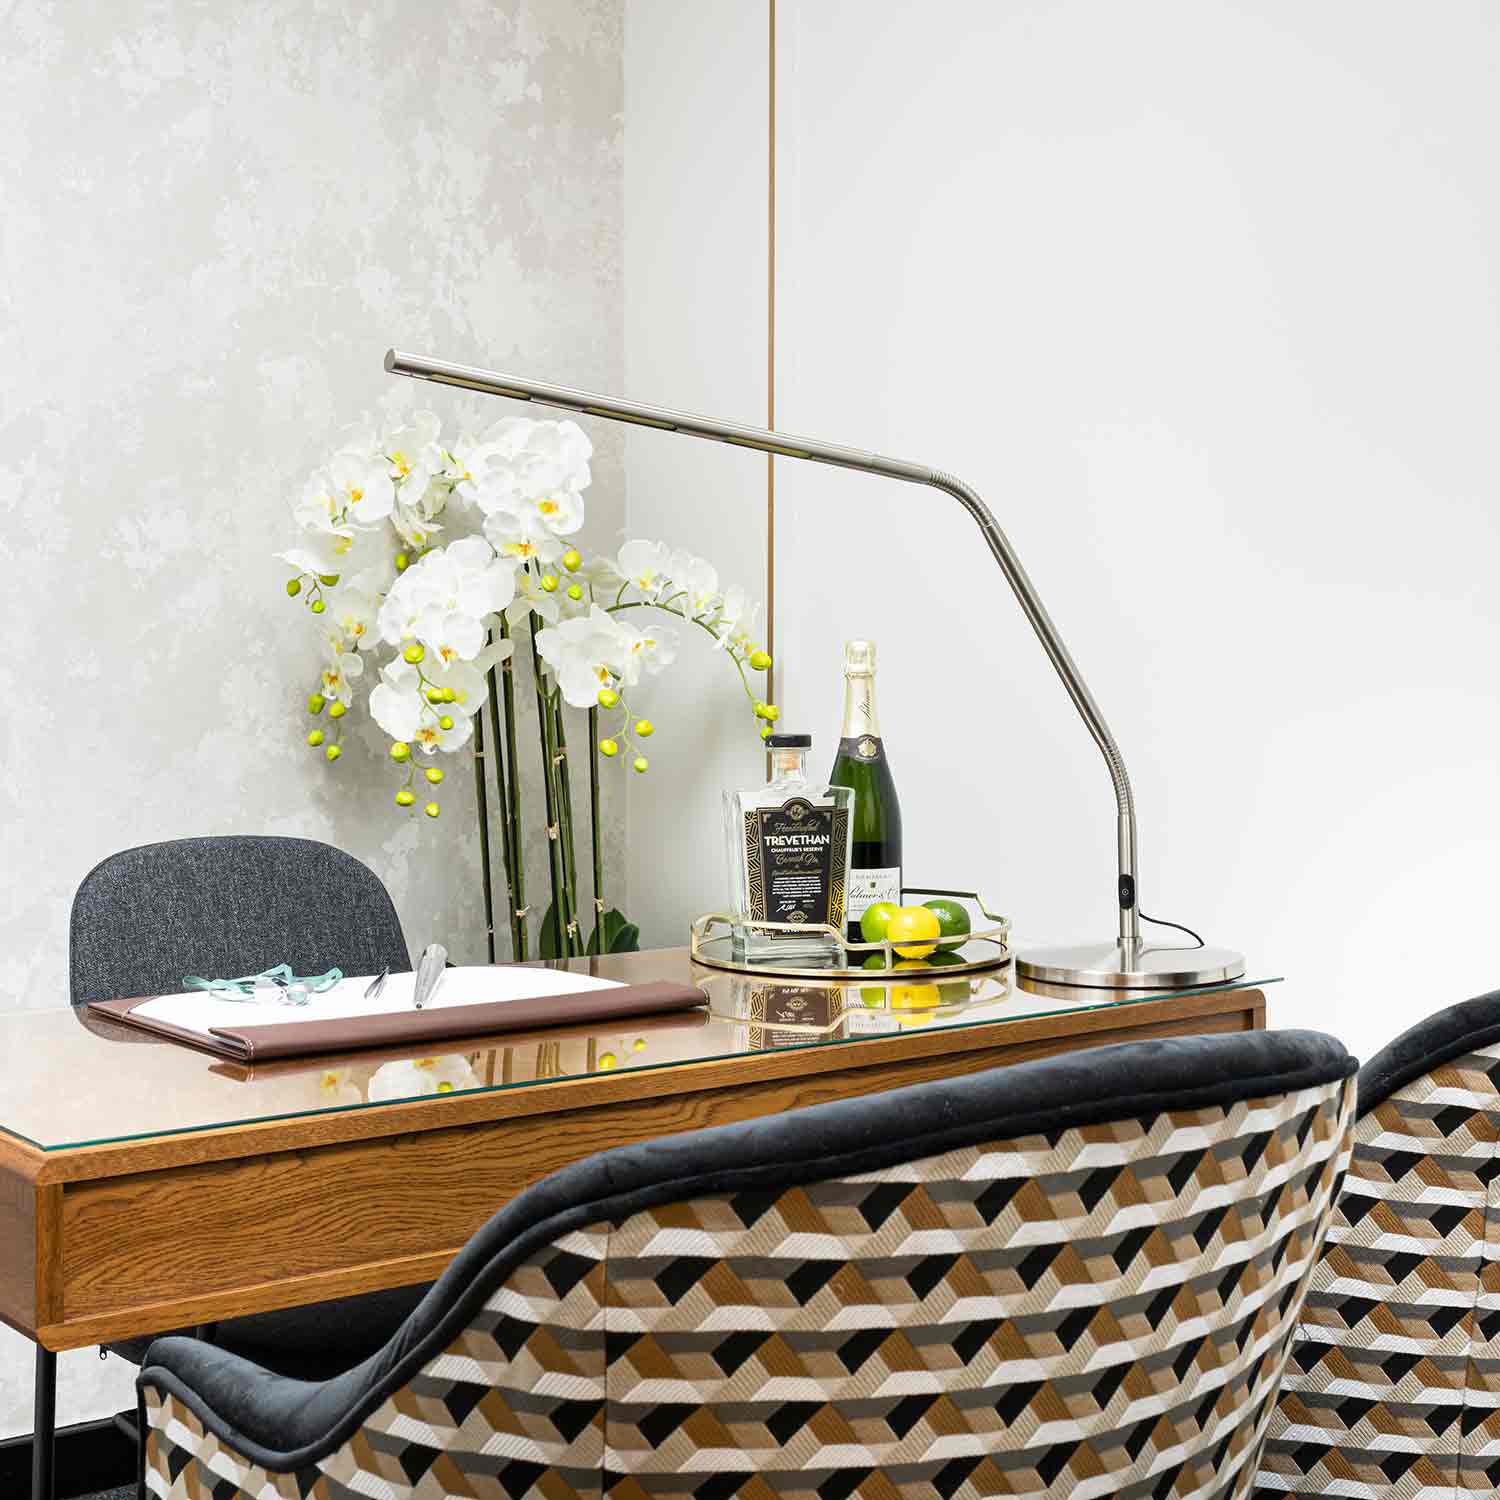 A London designer jewellery consultation room at the London Diamond Bourse. Two chairs upholstered in geometric fabric sit on one side of a polished wooden desk. A spray of white orchid-like flowers and liquor bottles decorate the desk